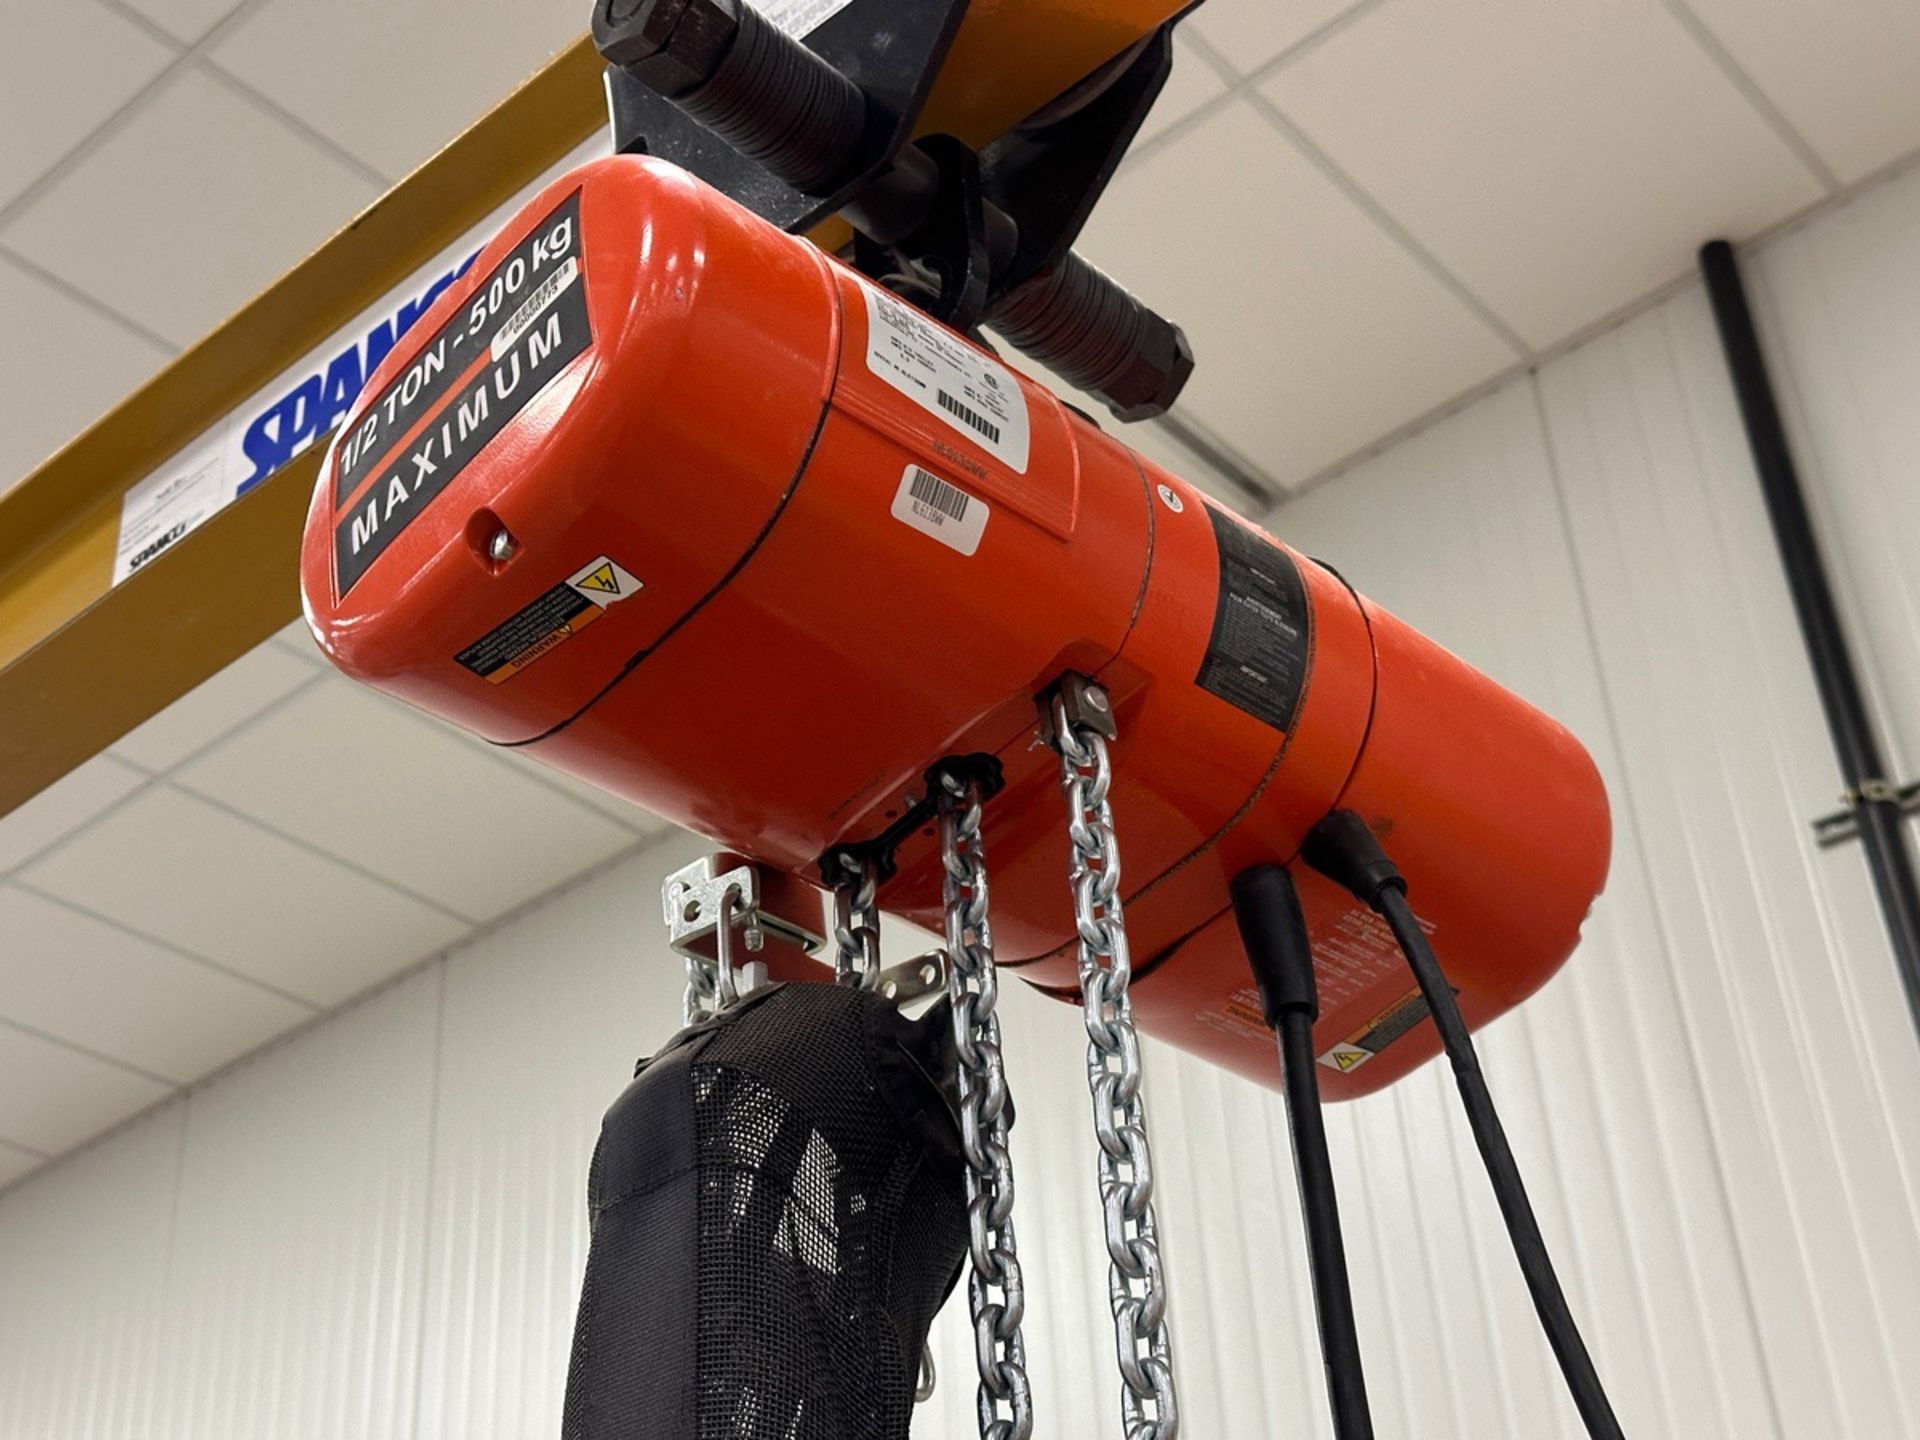 Spanco 11' Wide Gantry Crane on Casters with 1/2 Ton Chain Hoist | Rig Fee $250 - Image 3 of 4